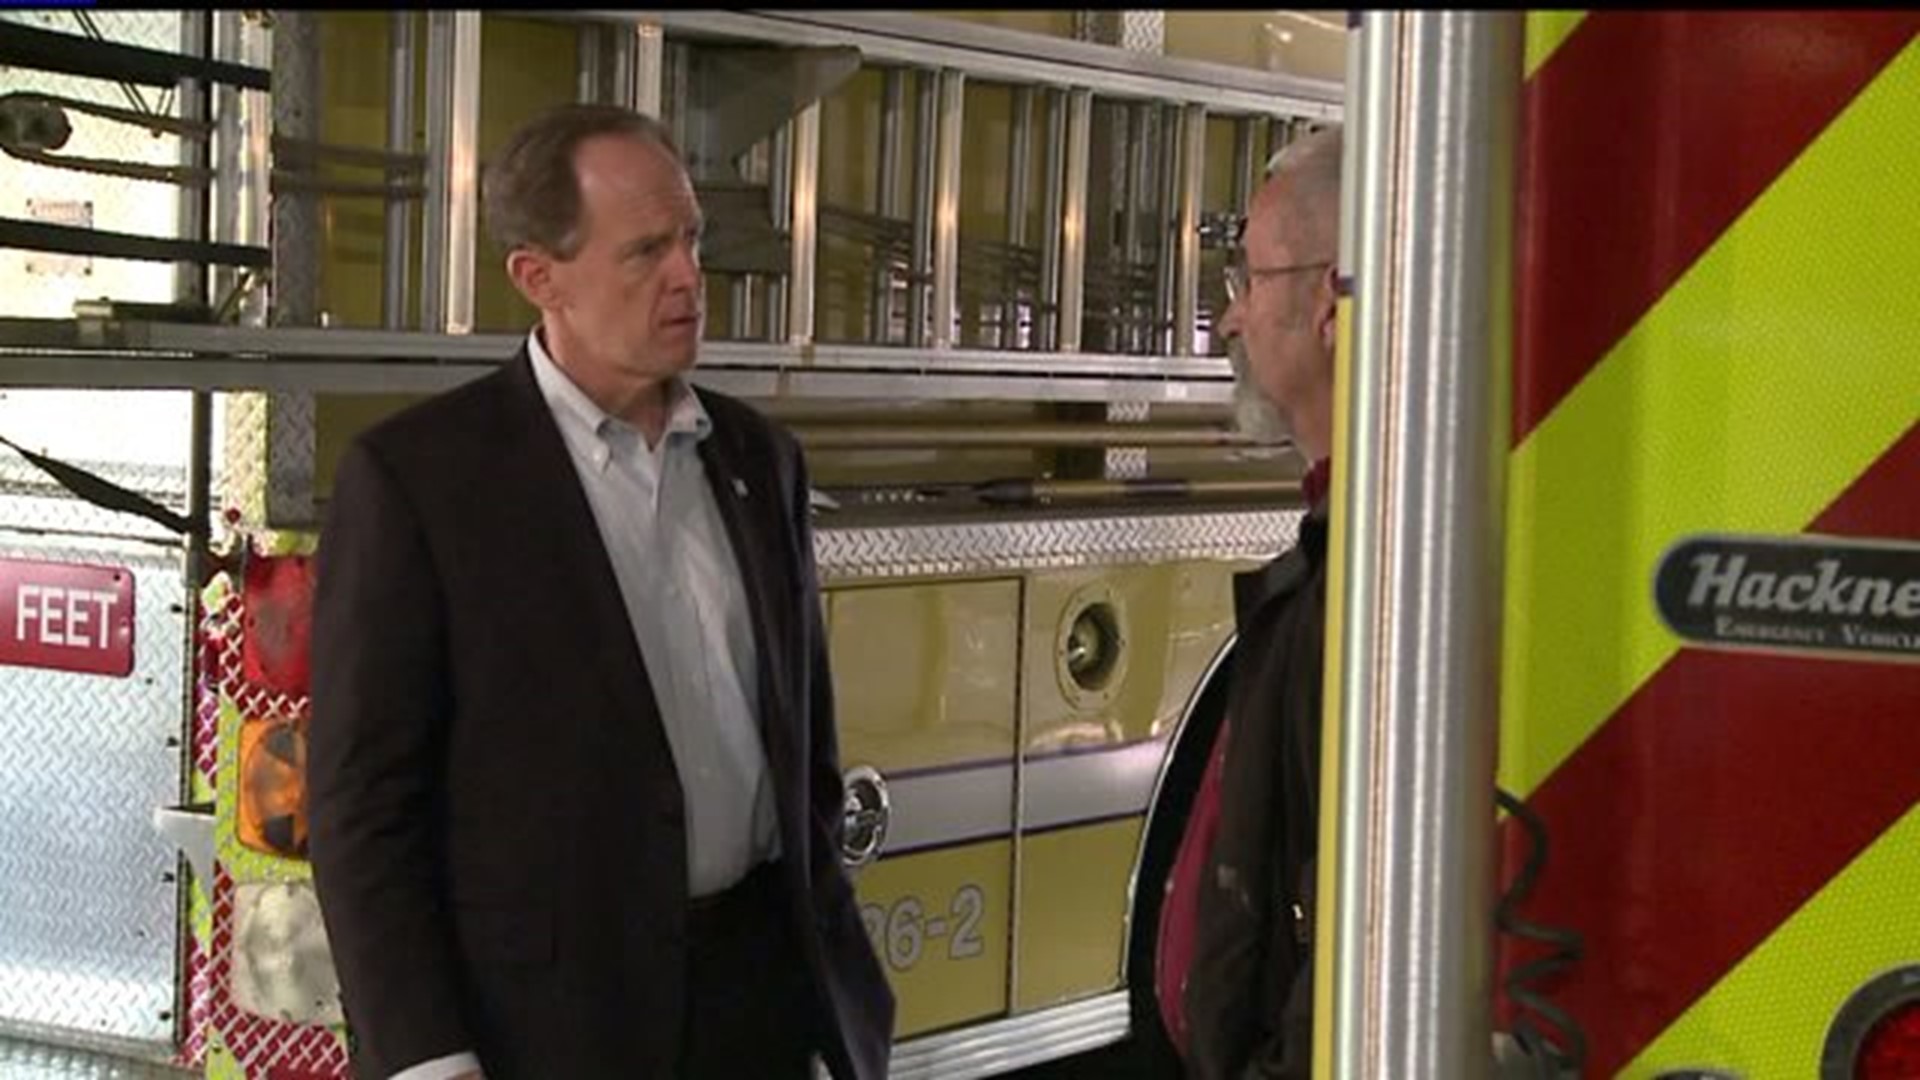 Sen. Toomey hosts meet and greet with local law enforcement in York County